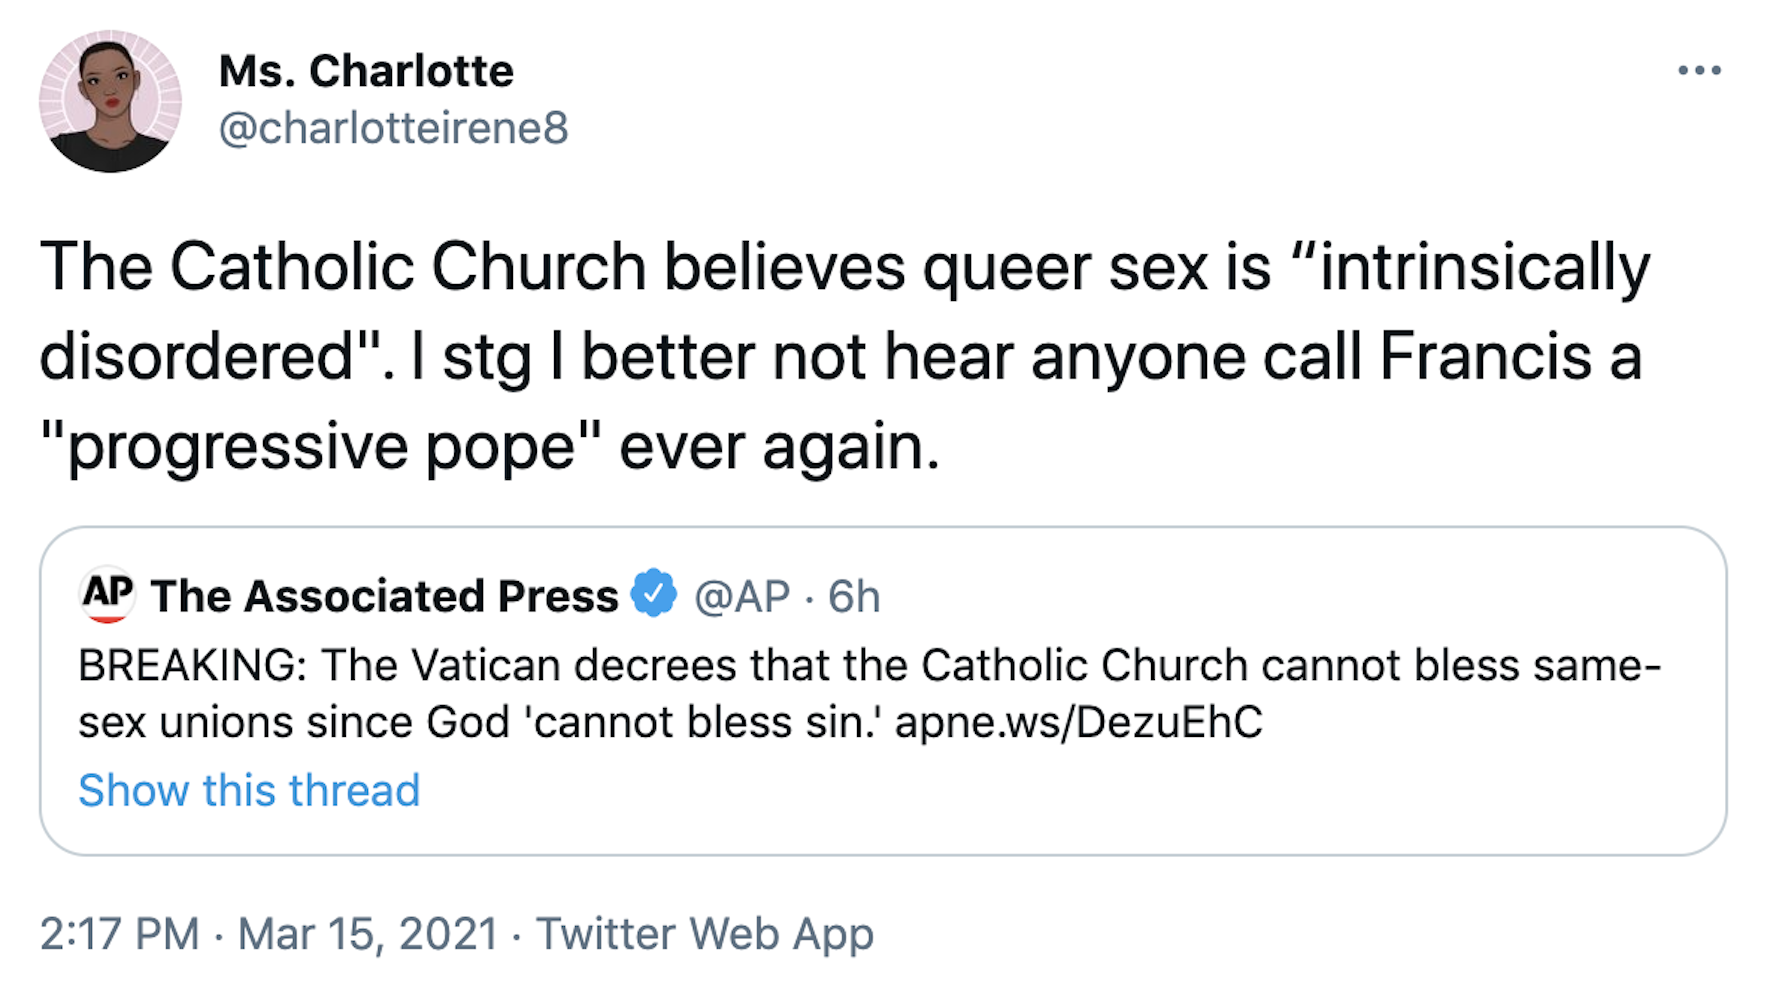 The Catholic Church believes queer sex is “intrinsically disordered". I stg I better not hear anyone call Francis a "progressive pope" ever again.